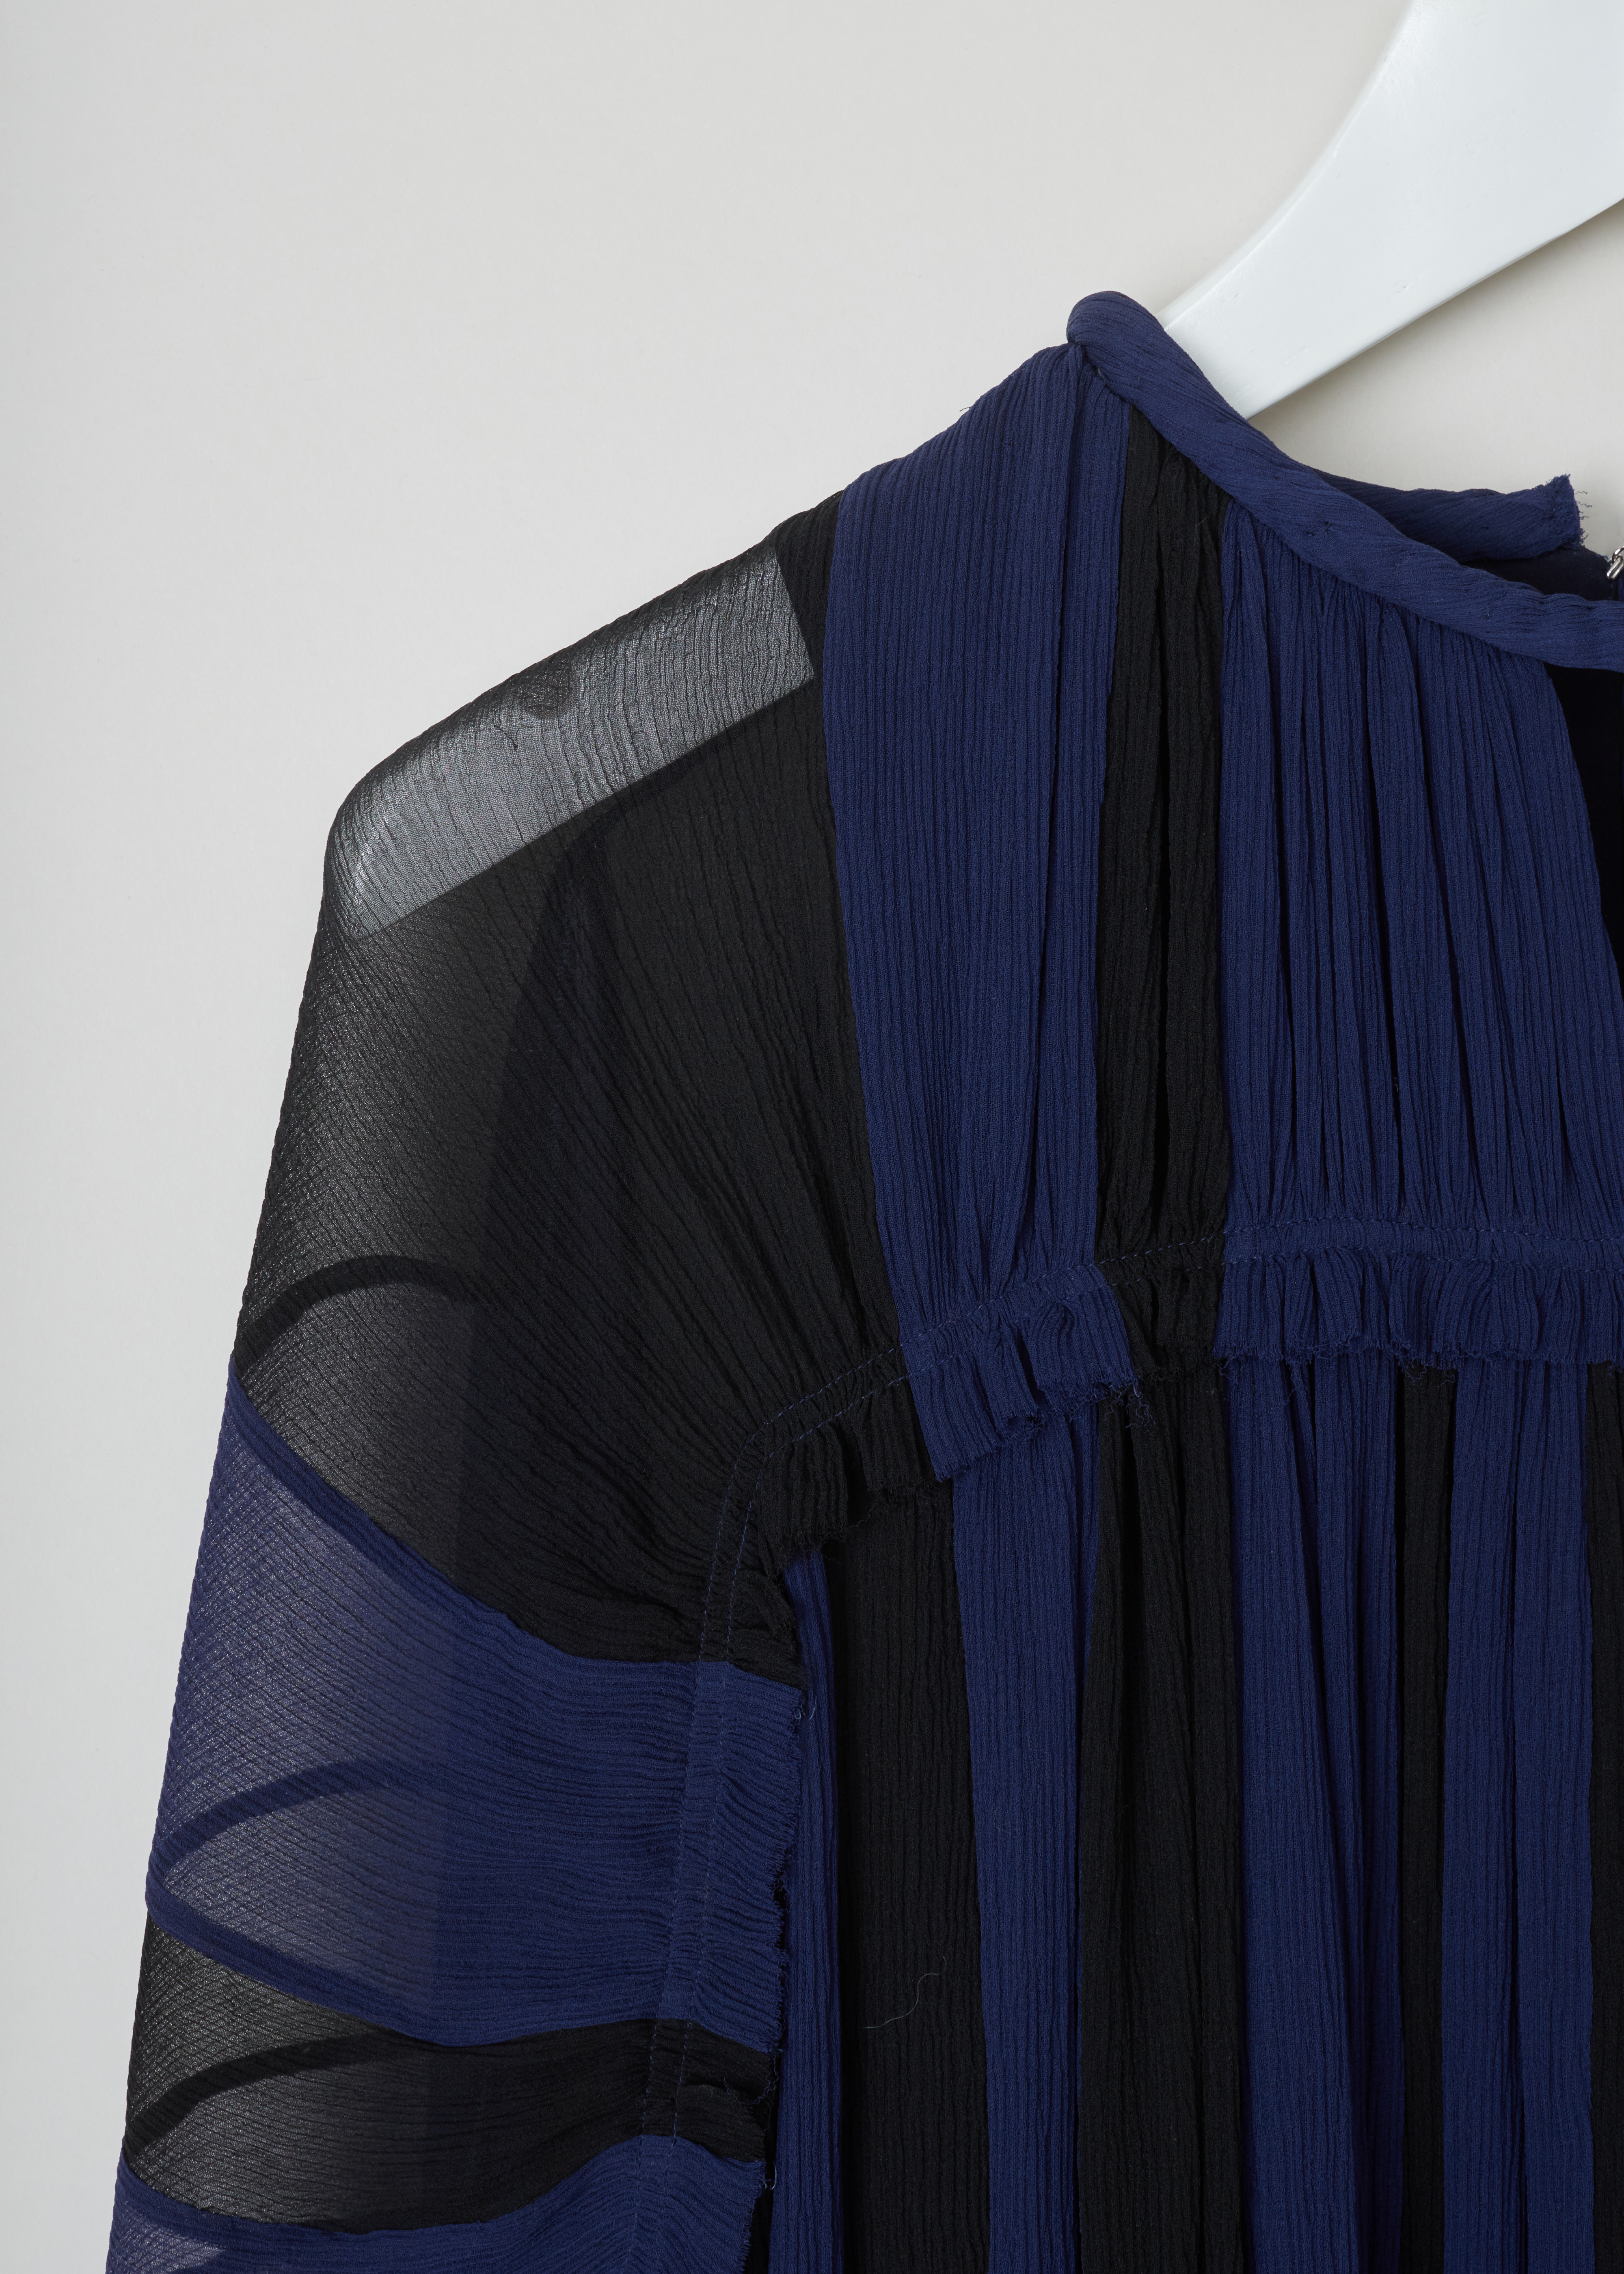 Chloé Gathered slik crepe dress CHC19ARO37006925_925_Black_Blue detail. This chic silk crepe dress has a blue and black vertically striped pattern. A gathered round neckline and ruffled sheer long sleeves. A ruffled waist and flared gathered midi skirt. 